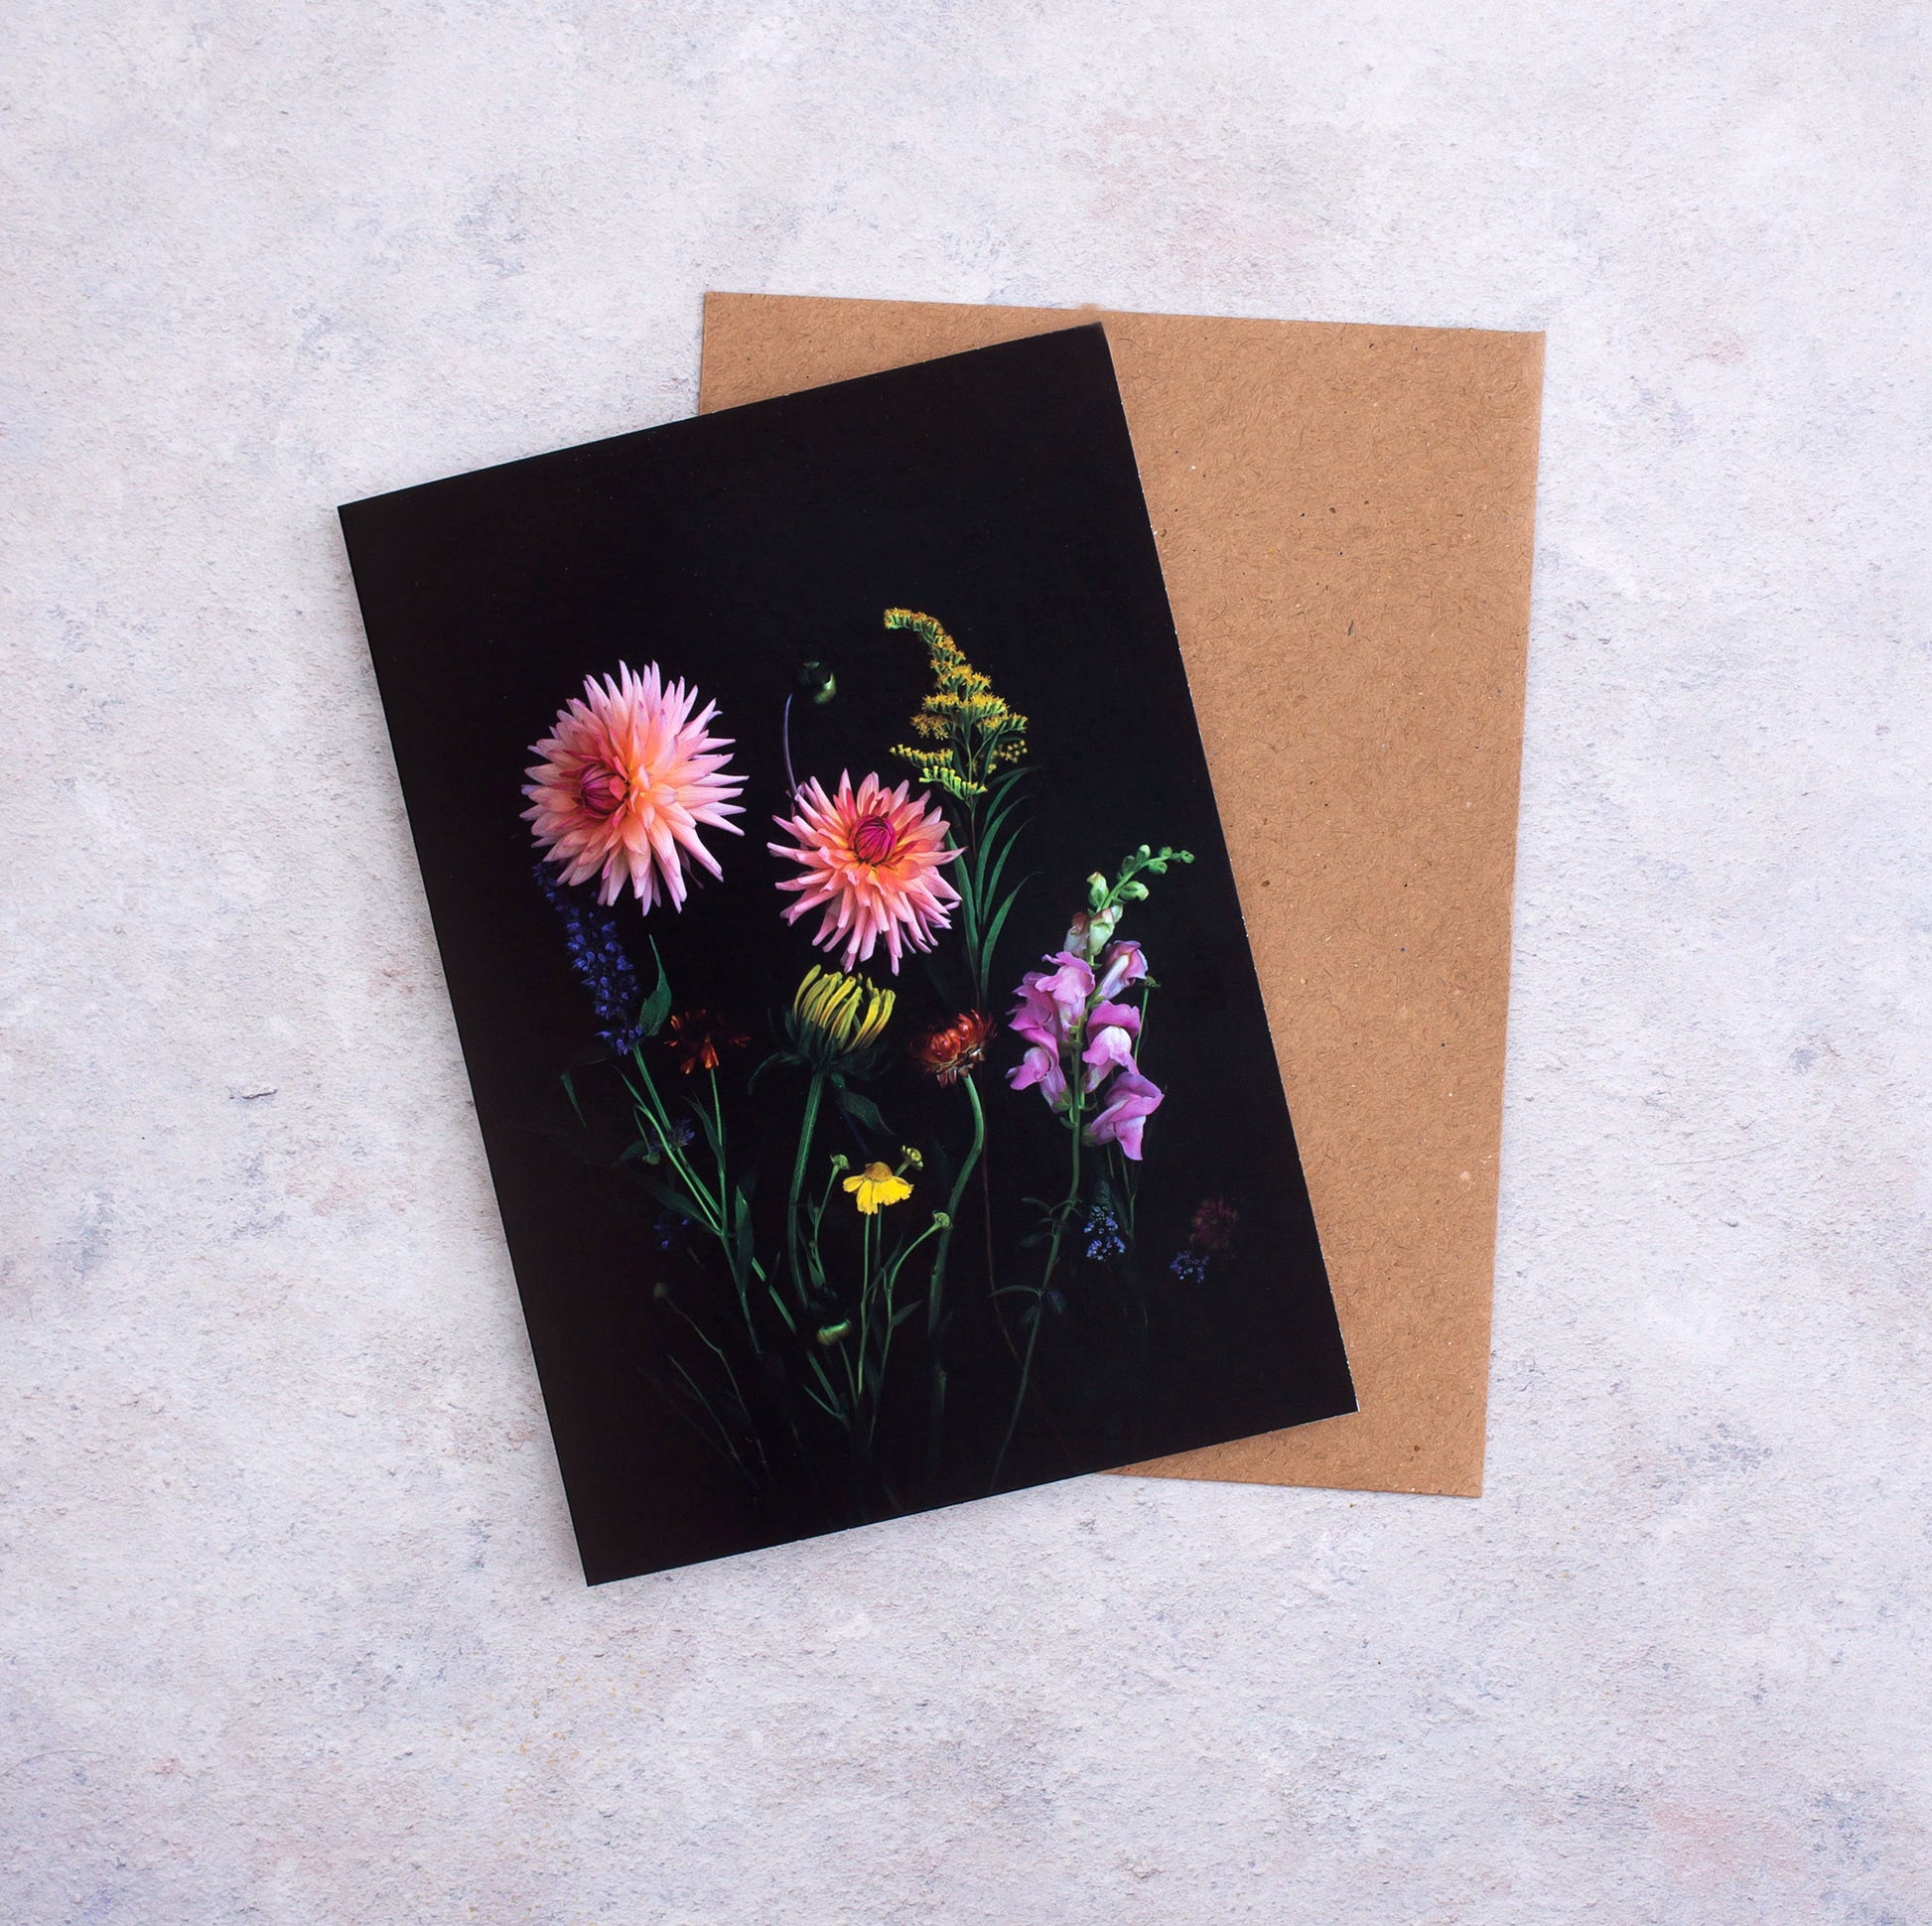 Botanical greeting card with Summer flowers on a black background.